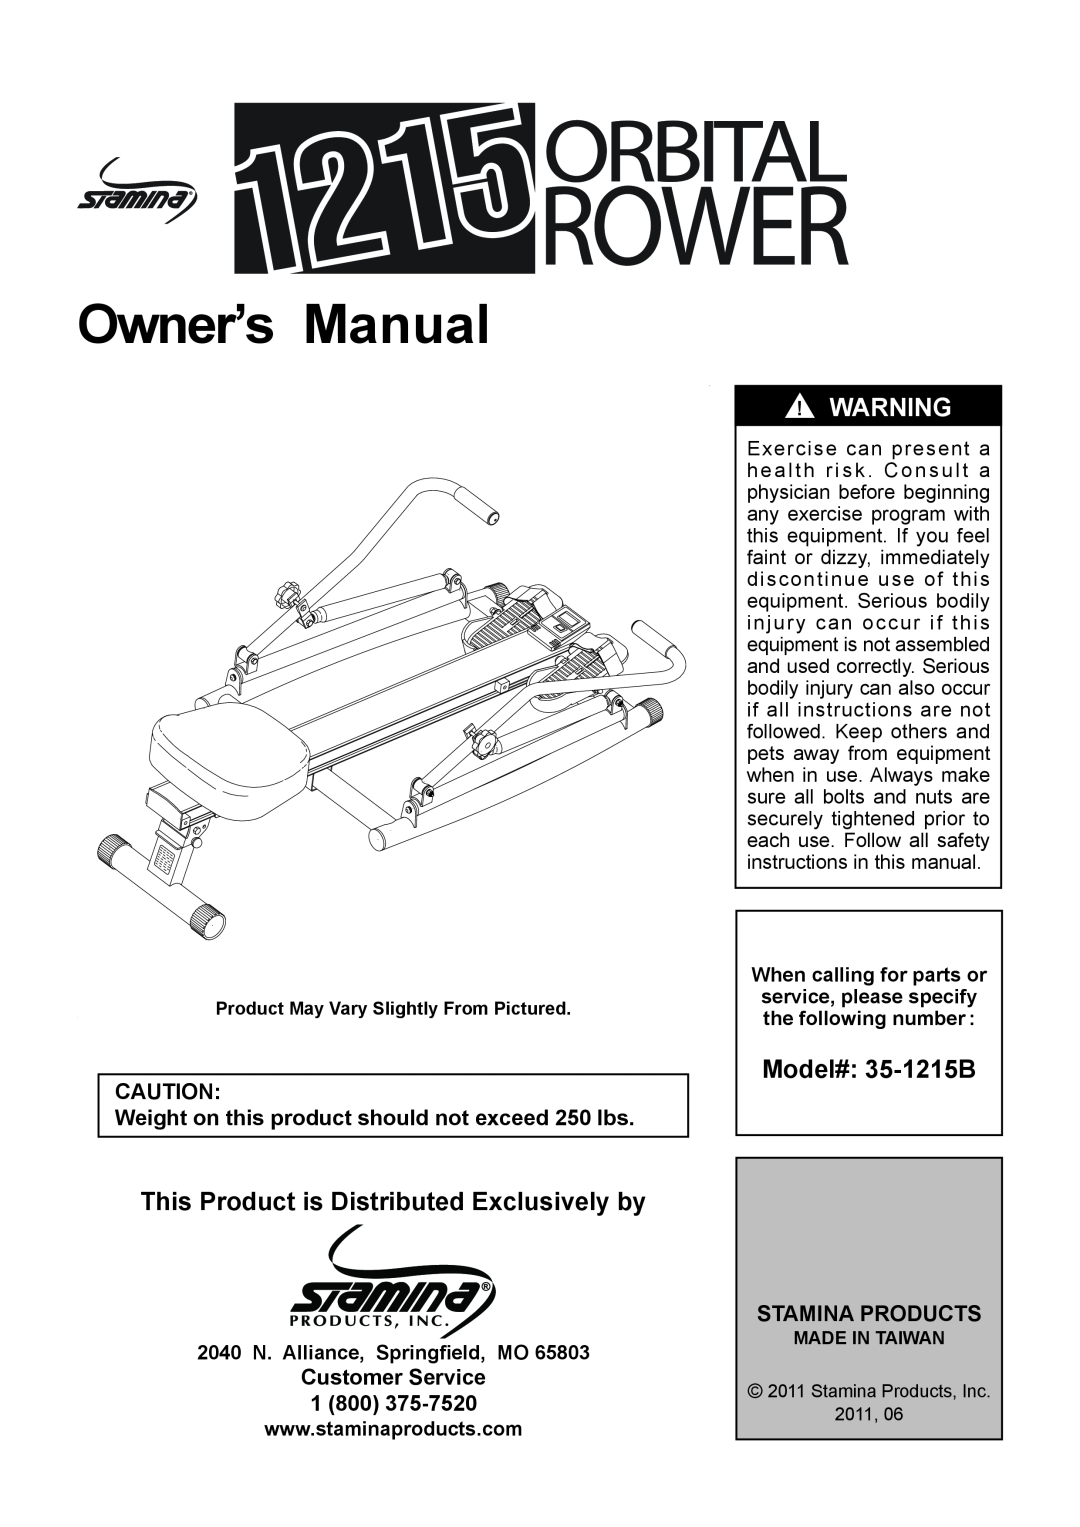 Sears owner manual Owner’s Manual, This Product is Distributed Exclusively by, Model# 35-1215B 